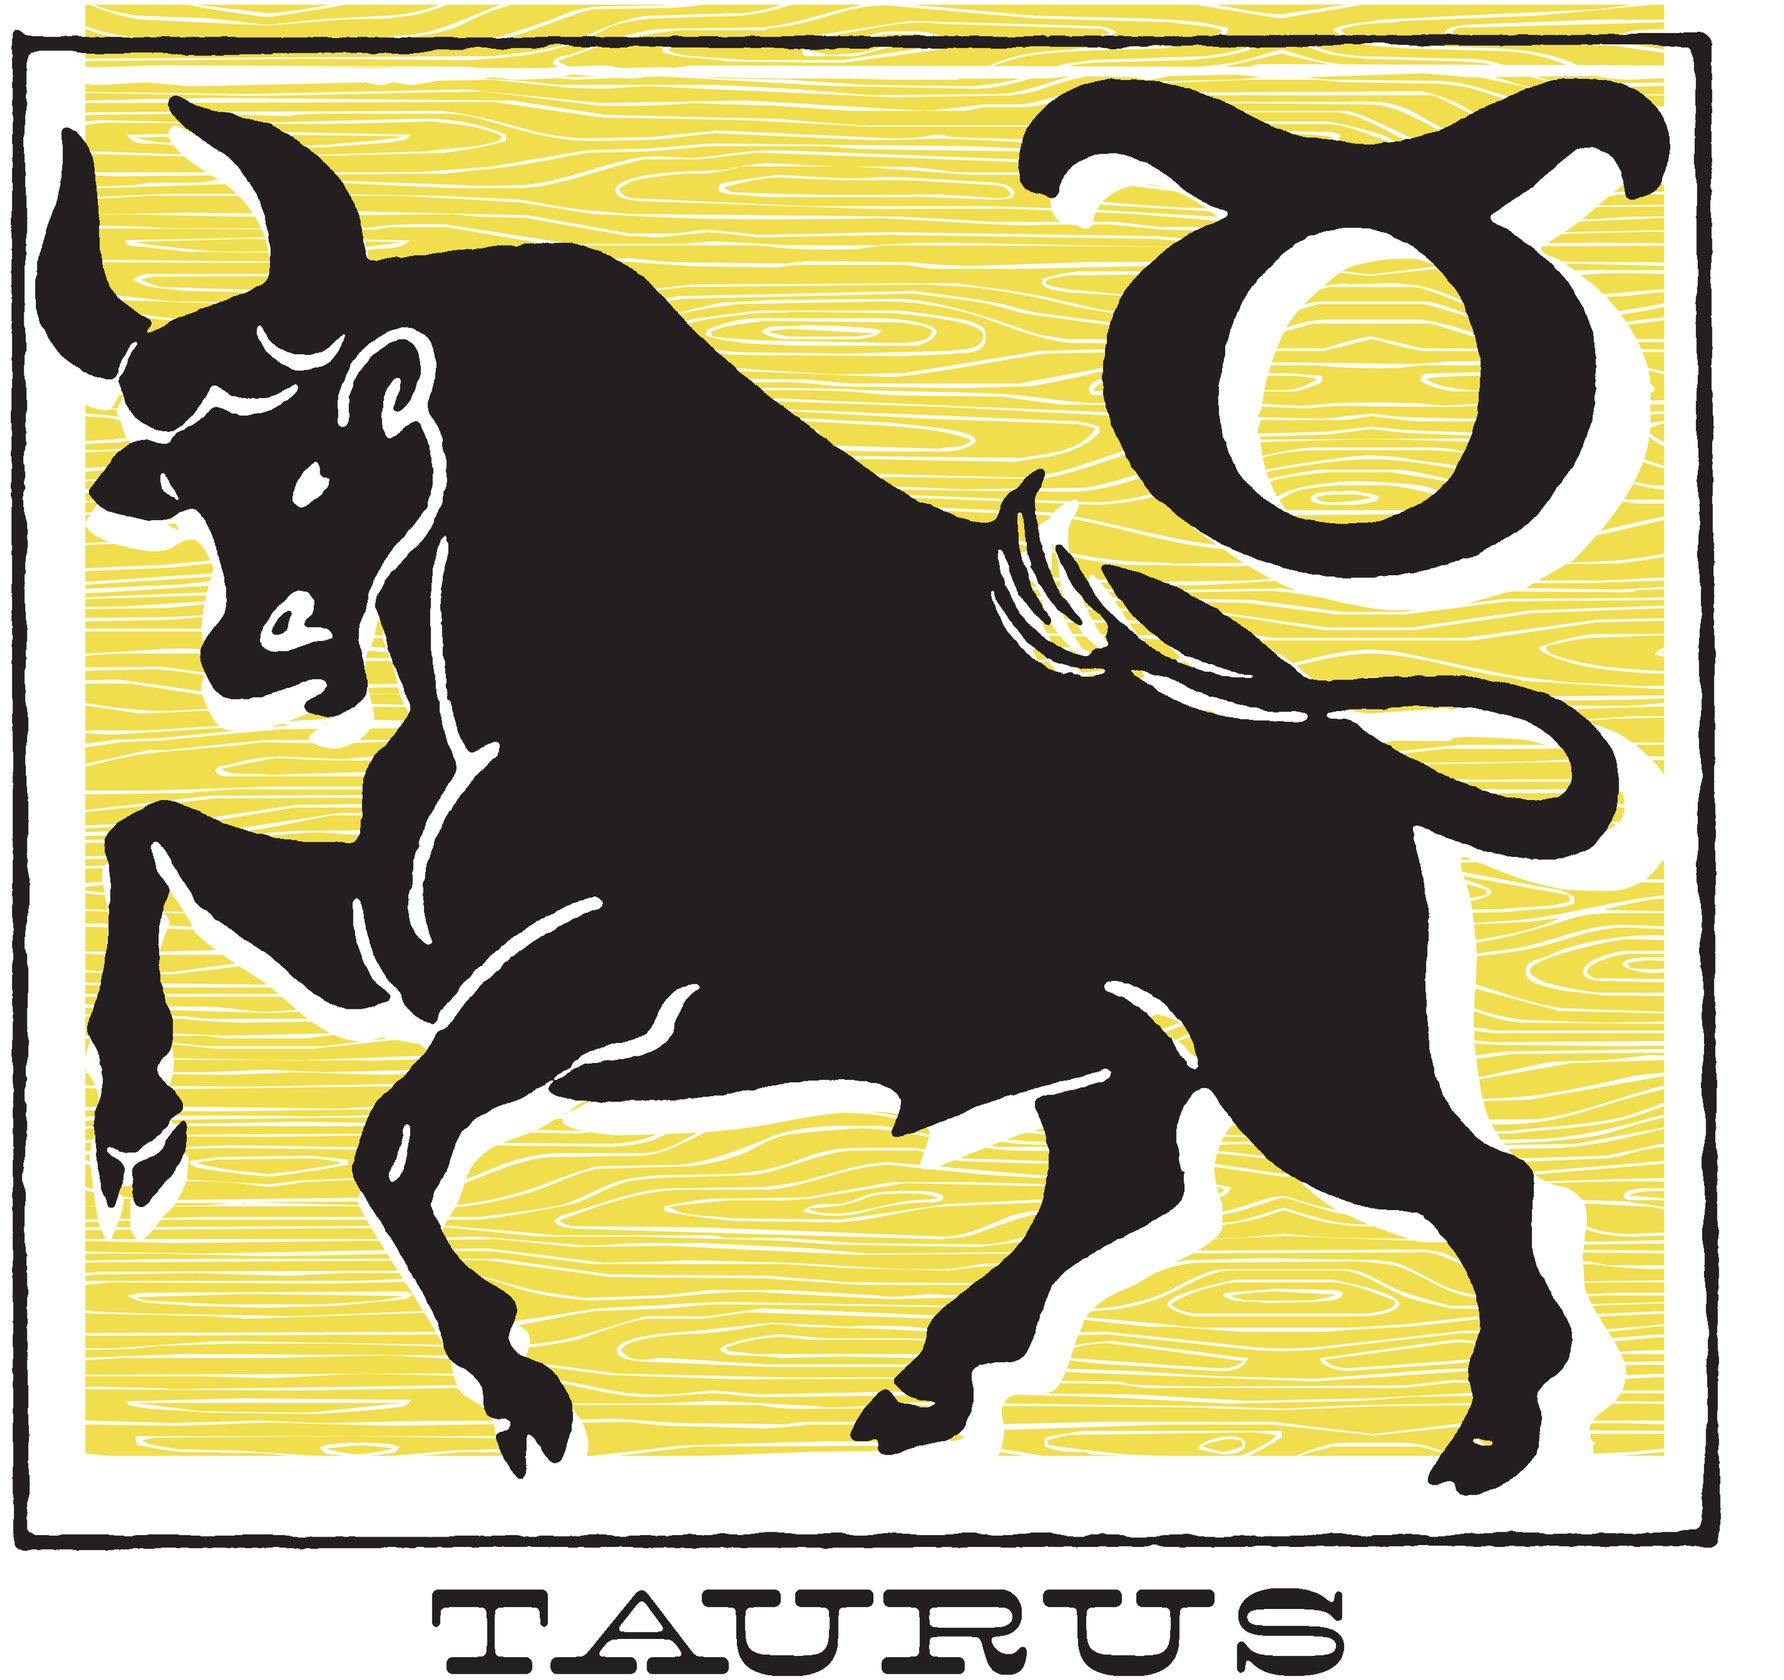 An image of the zodiac sign Taurus. | Source: Getty Images